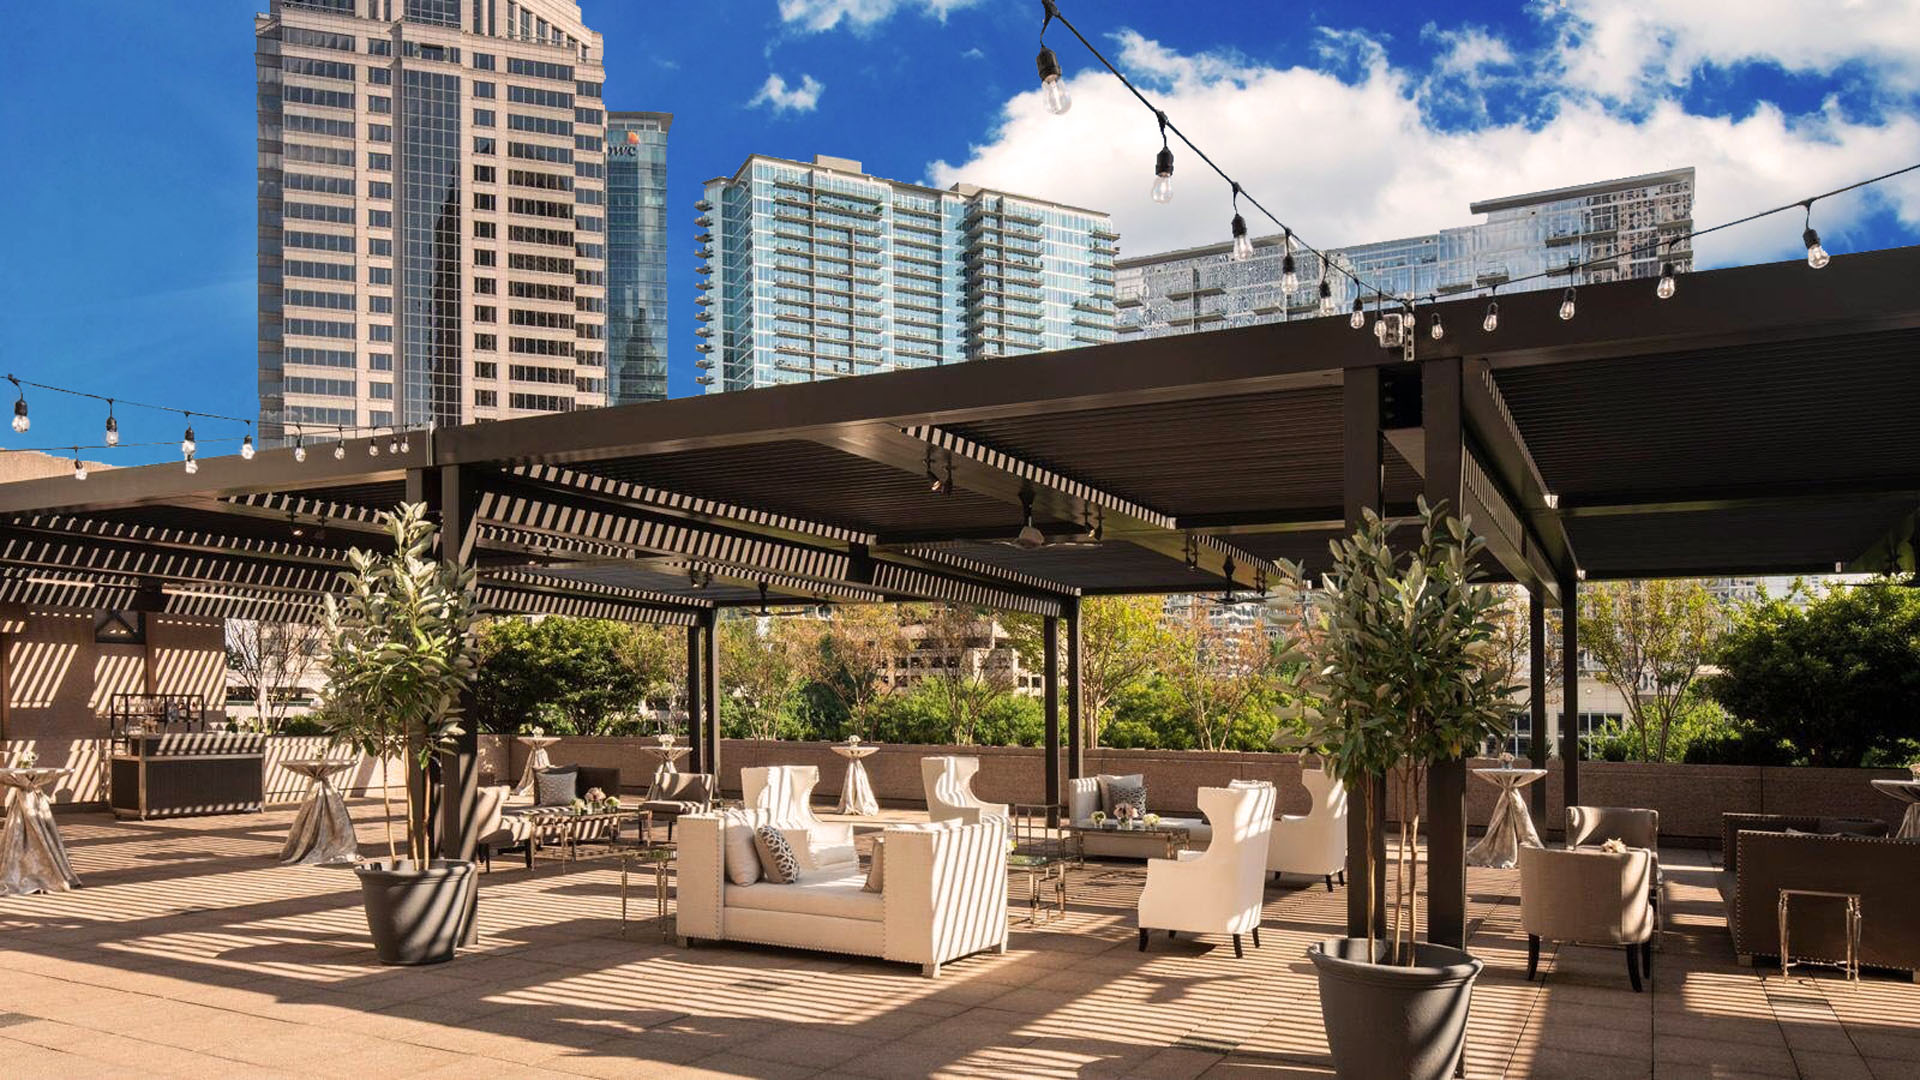 A luxurious hotel patio covered by a row of motorized pergolas.